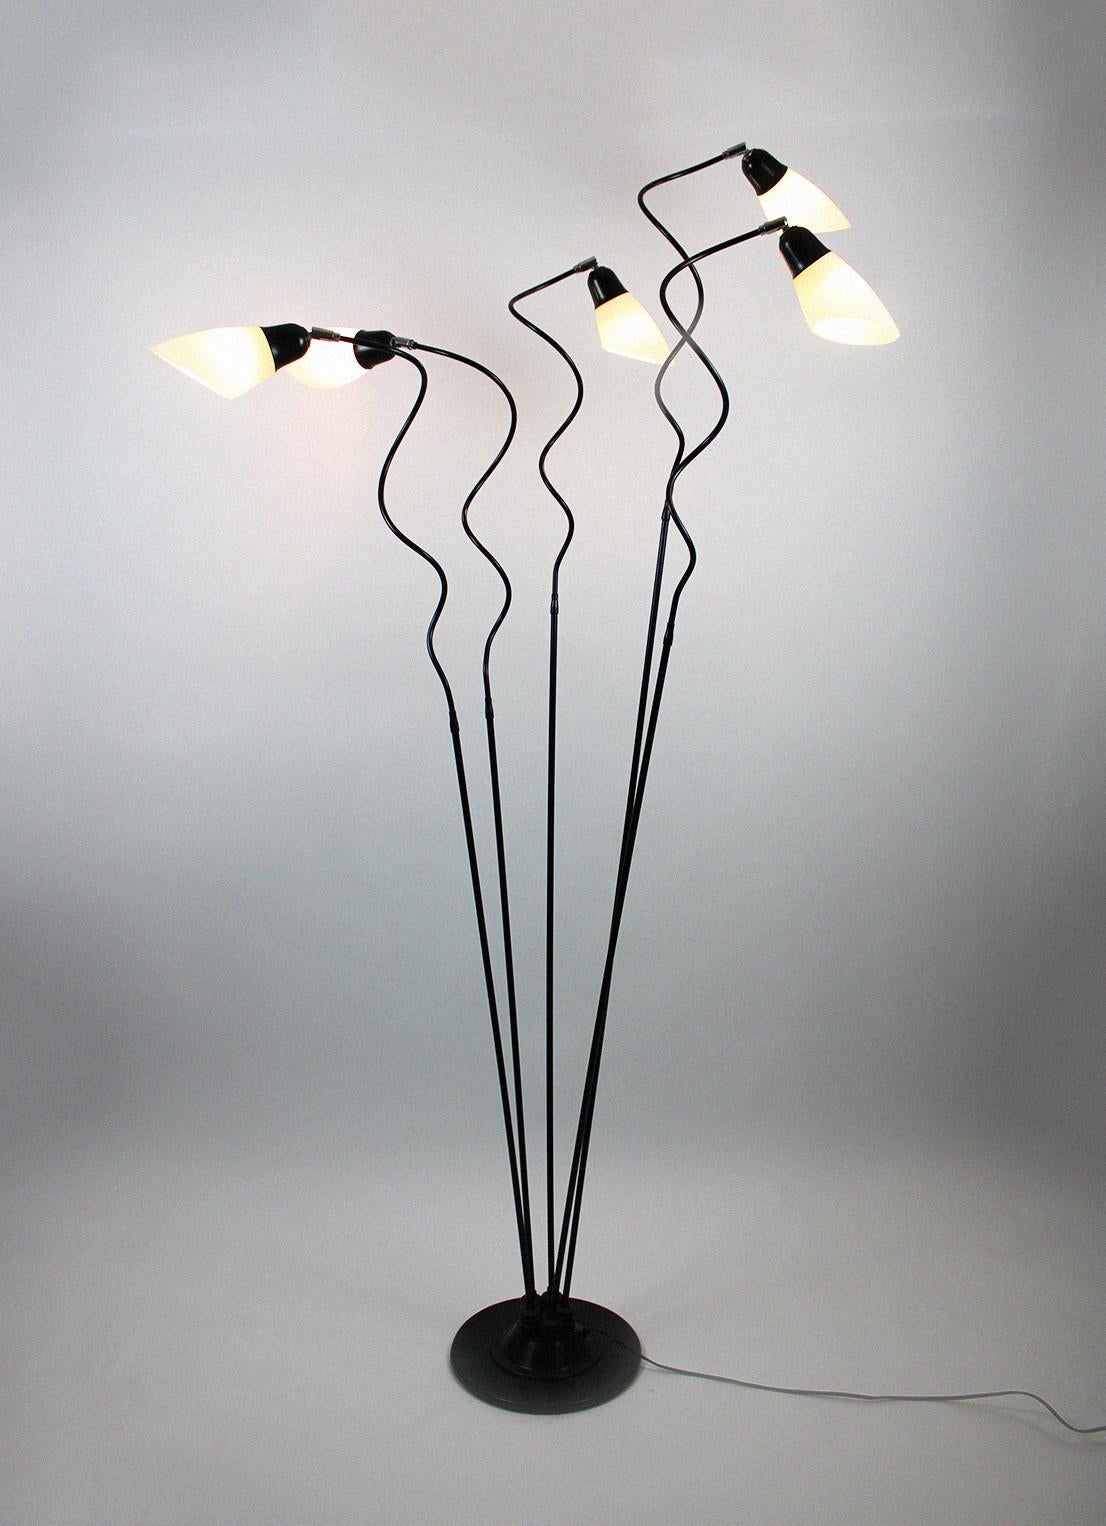 This vintage floor lamp is made of milk glass and comes from France. With lampshades made of the iconic Vianne glass, a well-known and influential manufacturer from France, this unique floor lamp immediately stands out in any kind of interior. With